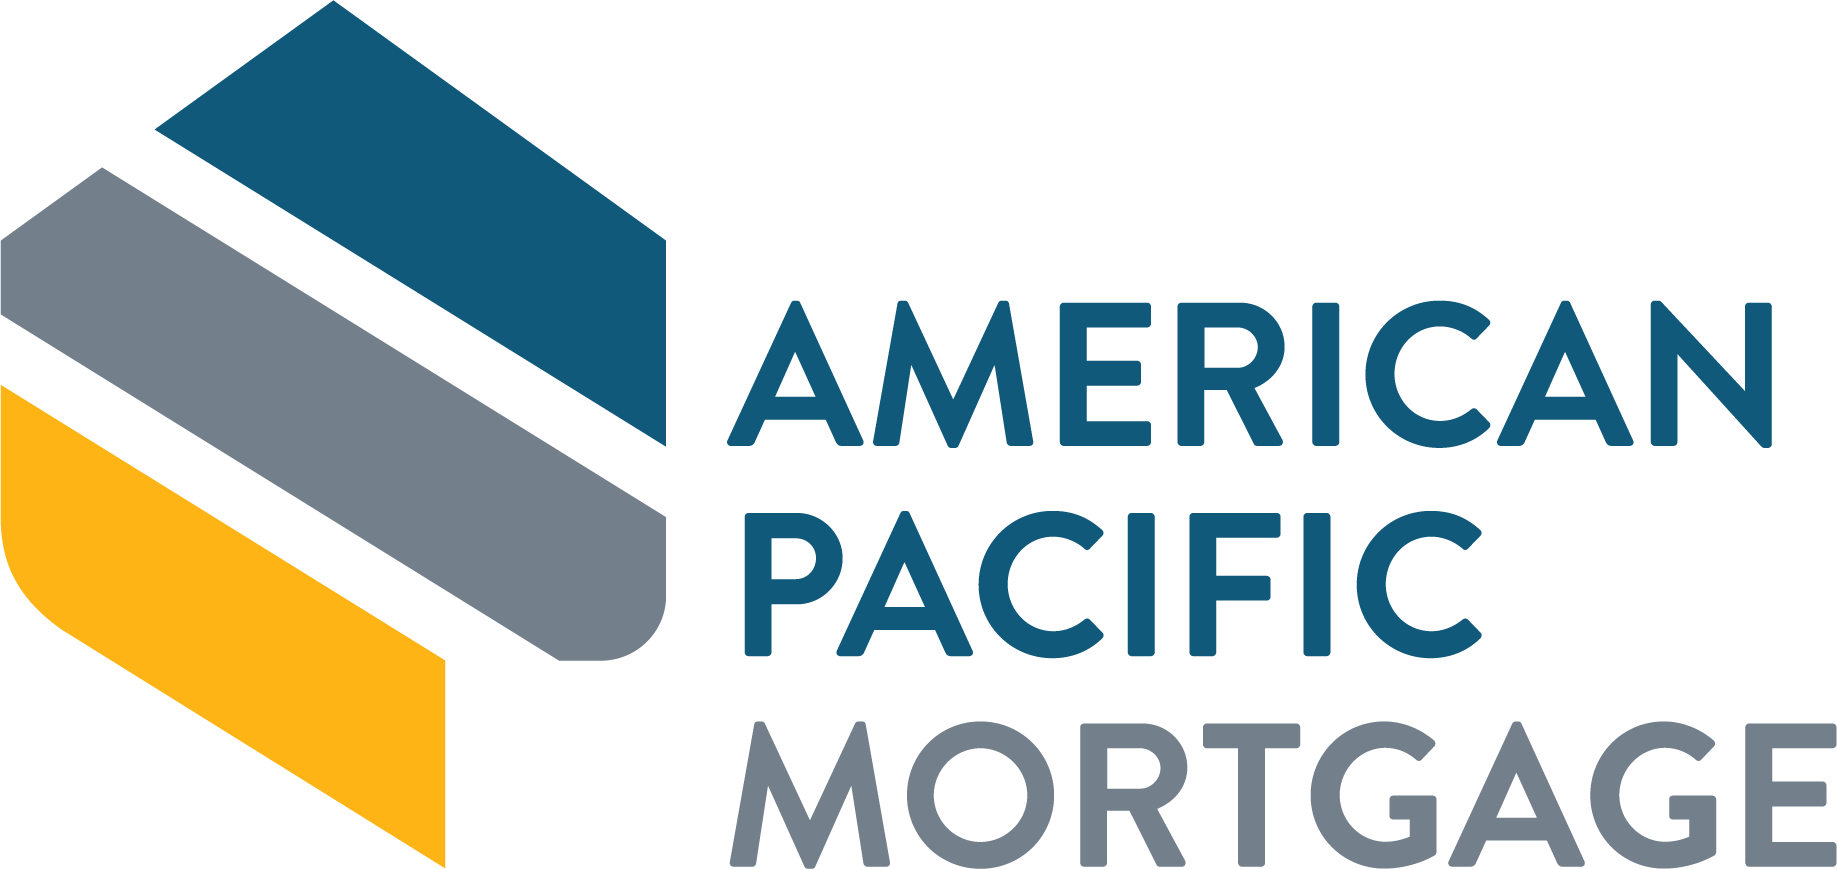 Imortgage Logo - Which Mortgage Option Is For You? | AP Mortgage